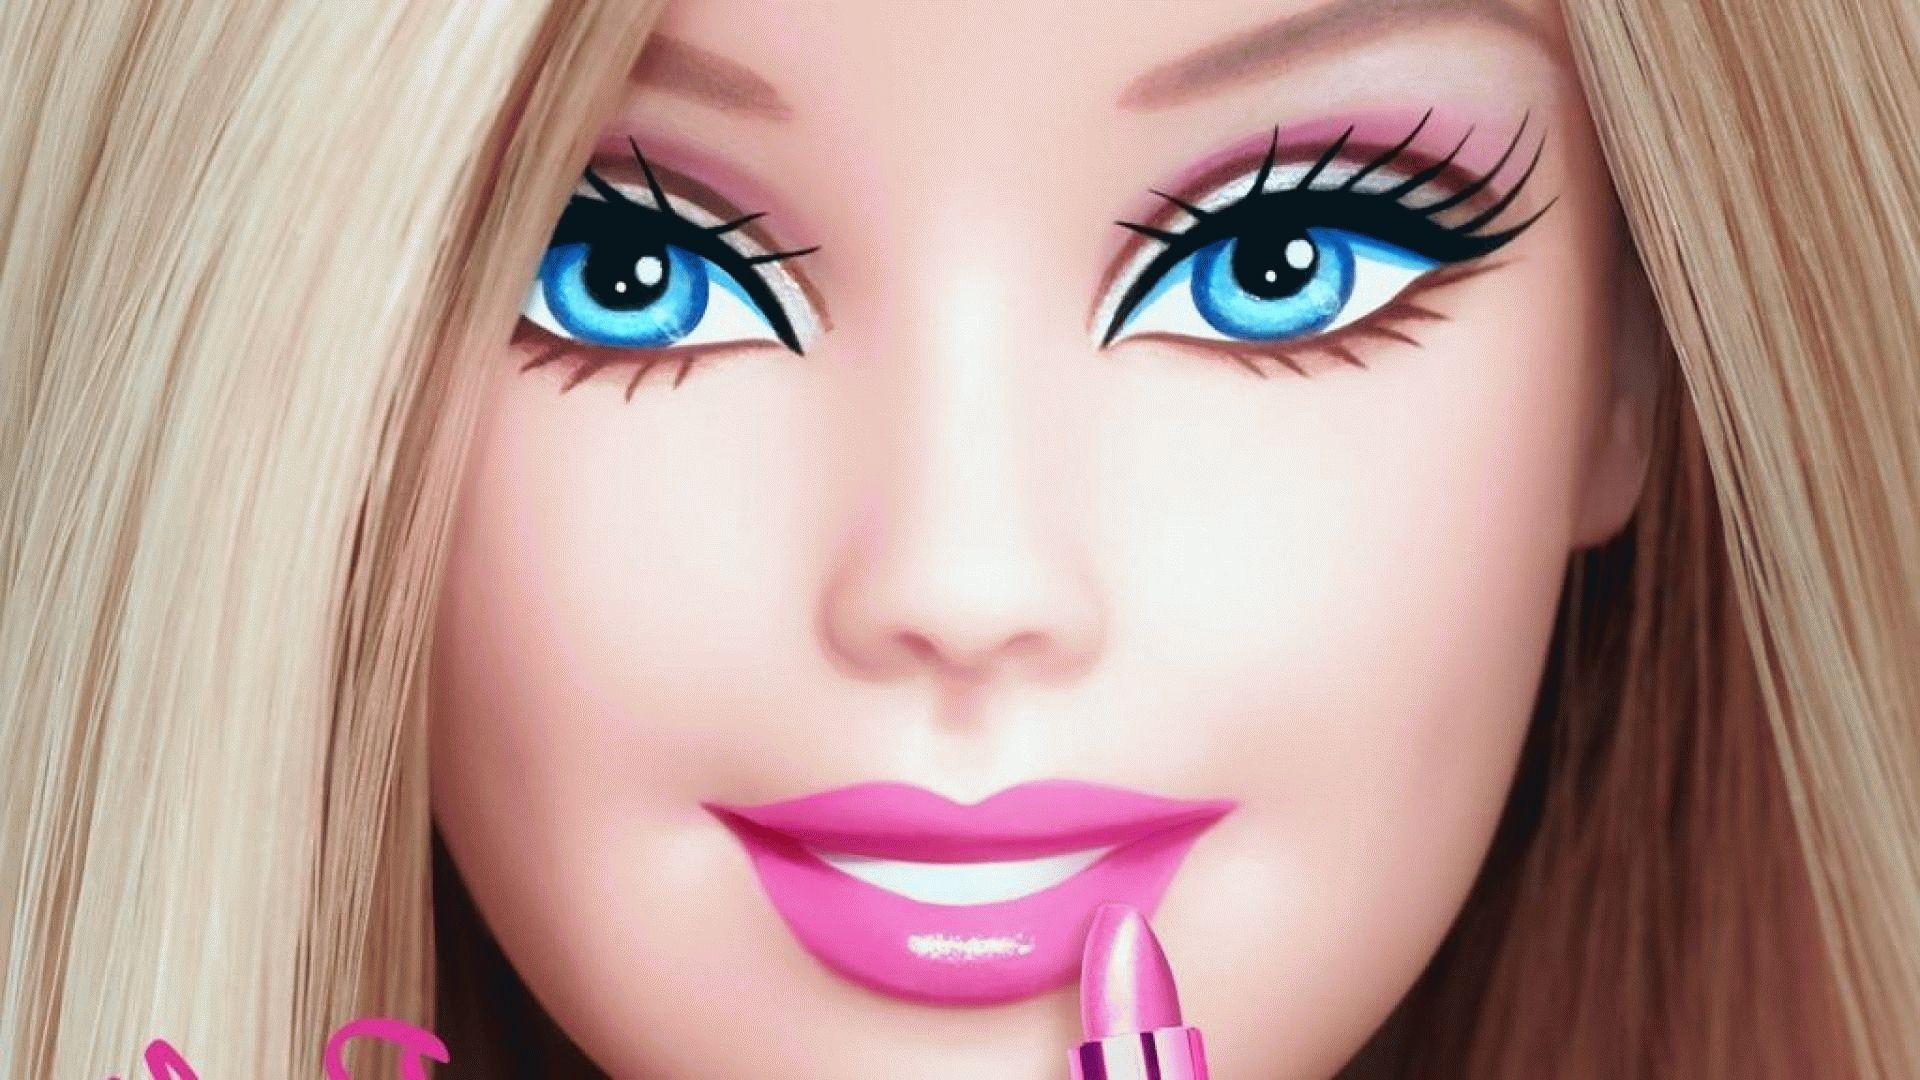 Barbie Wallpaper Hd Barbie Hd Wallpapers Background Images | The Best ...